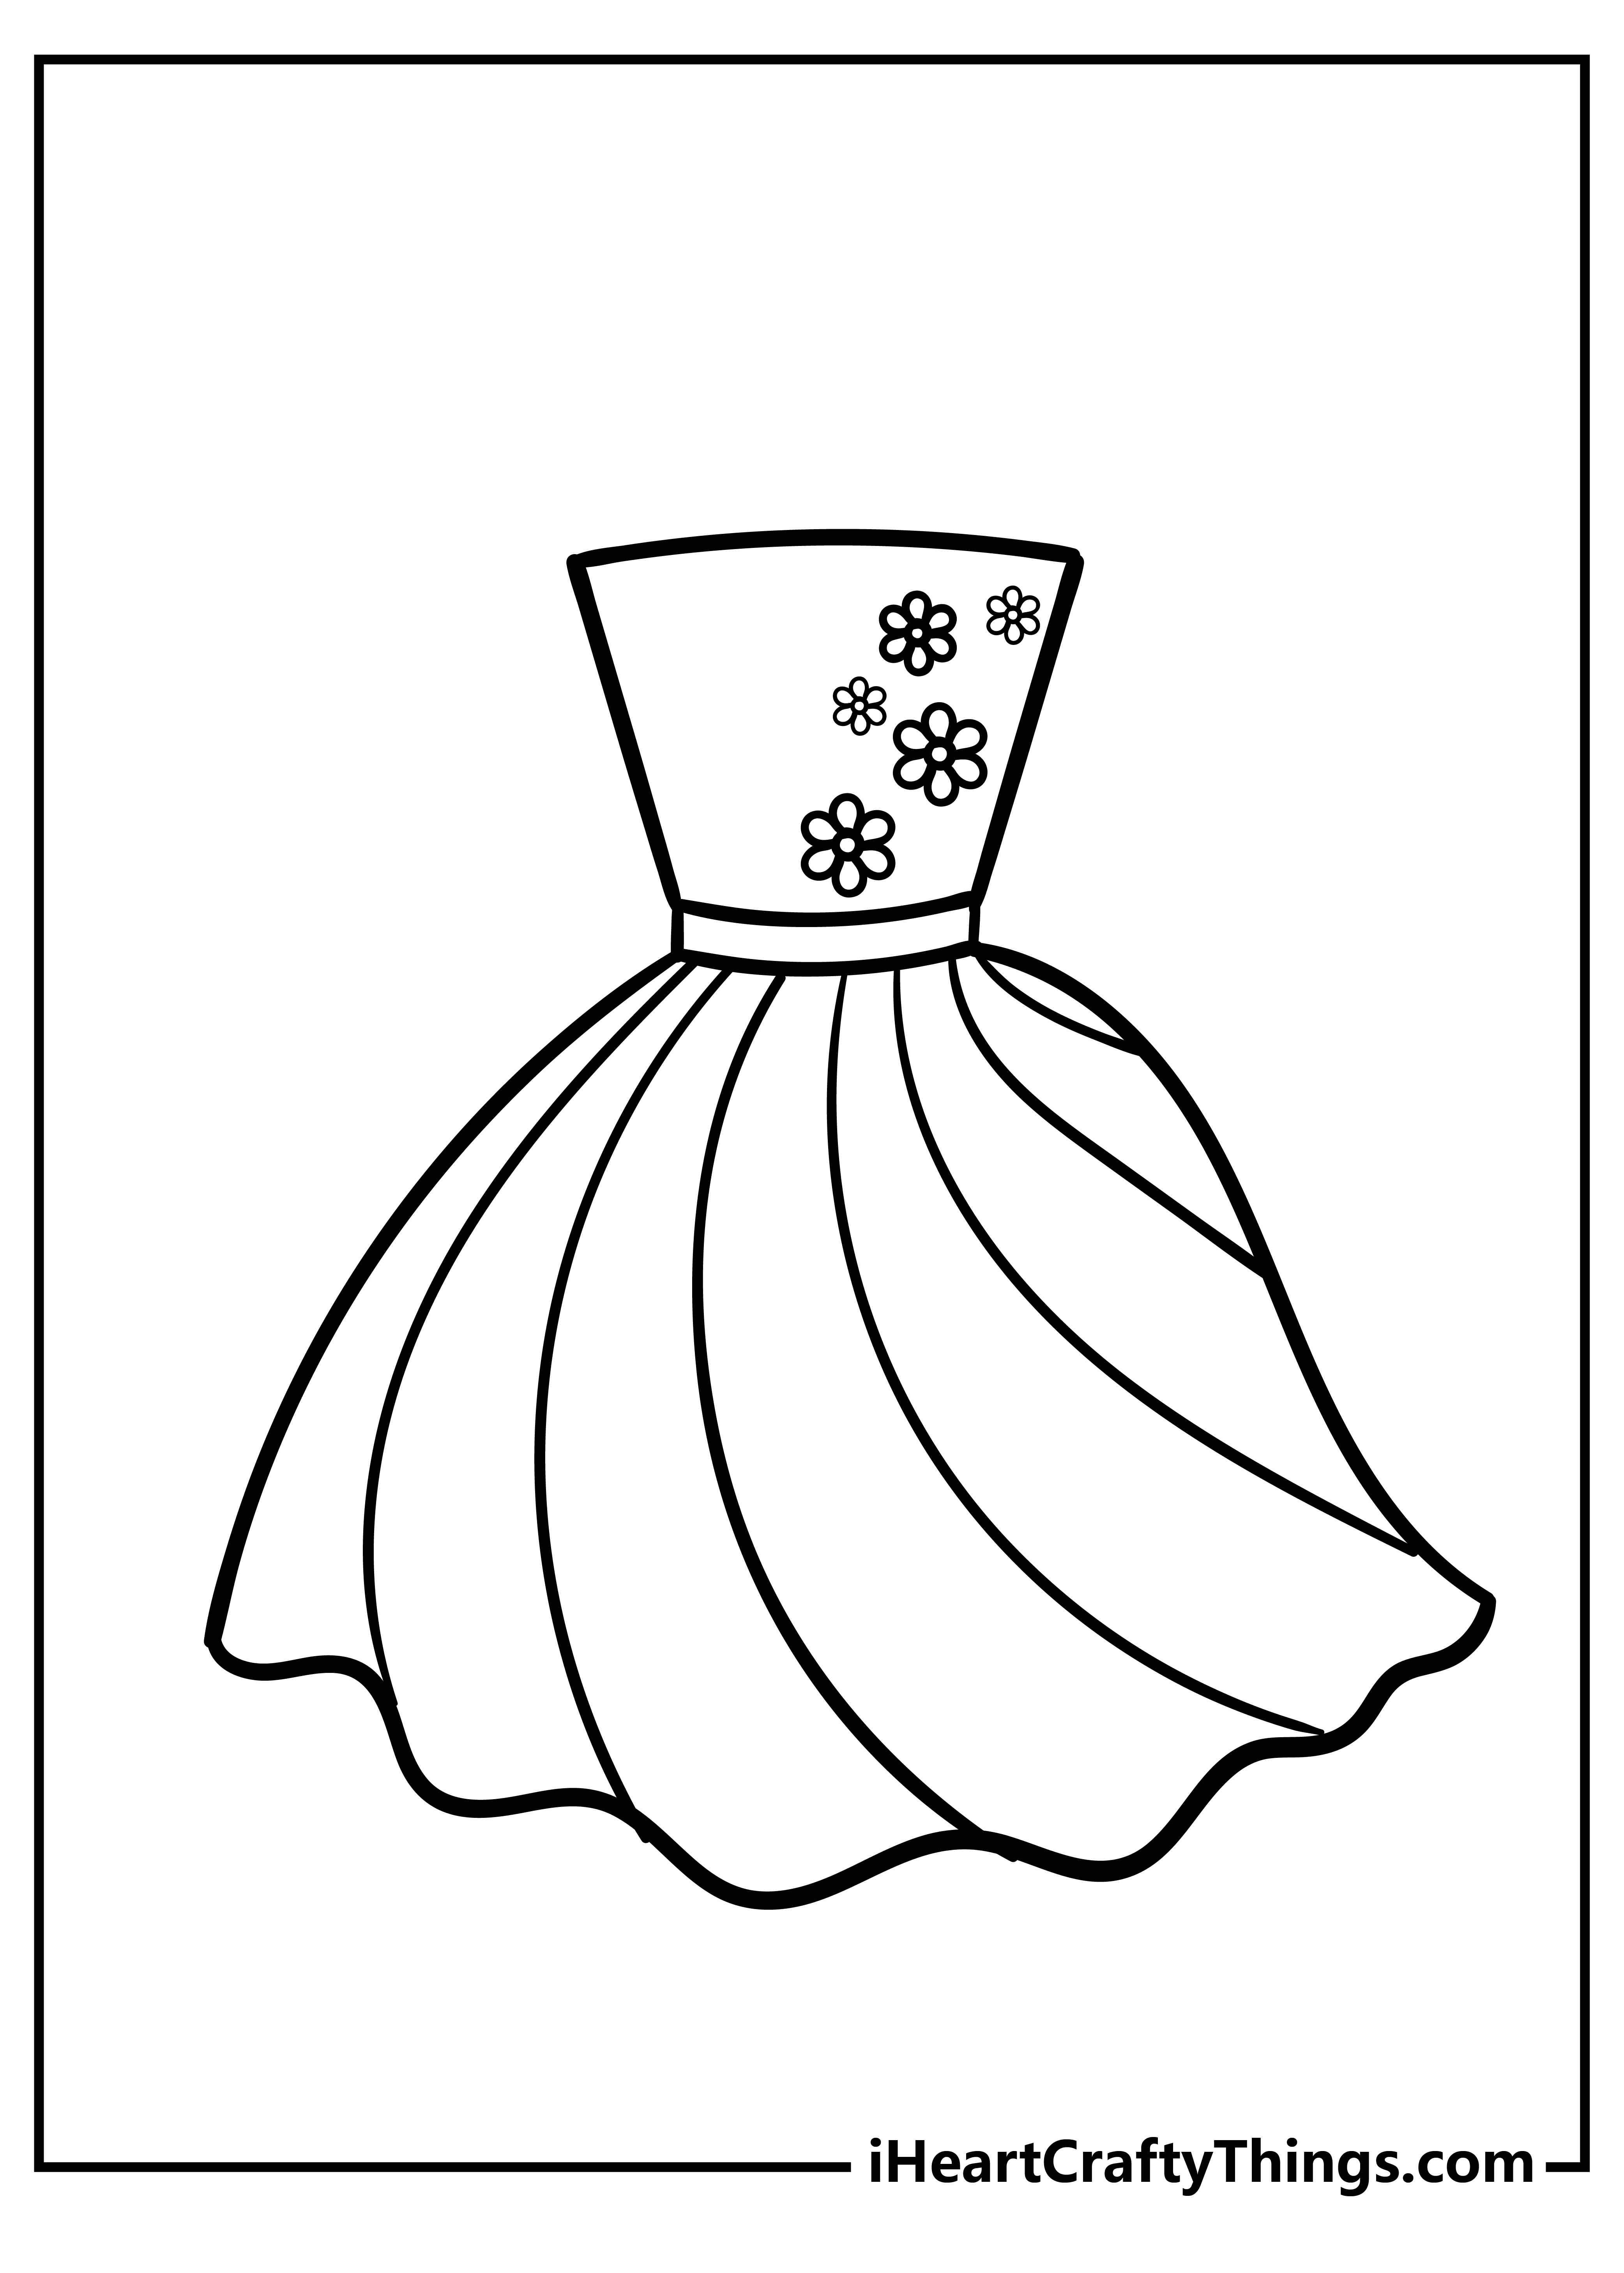 Printable Dress Coloring Pages Updated 21